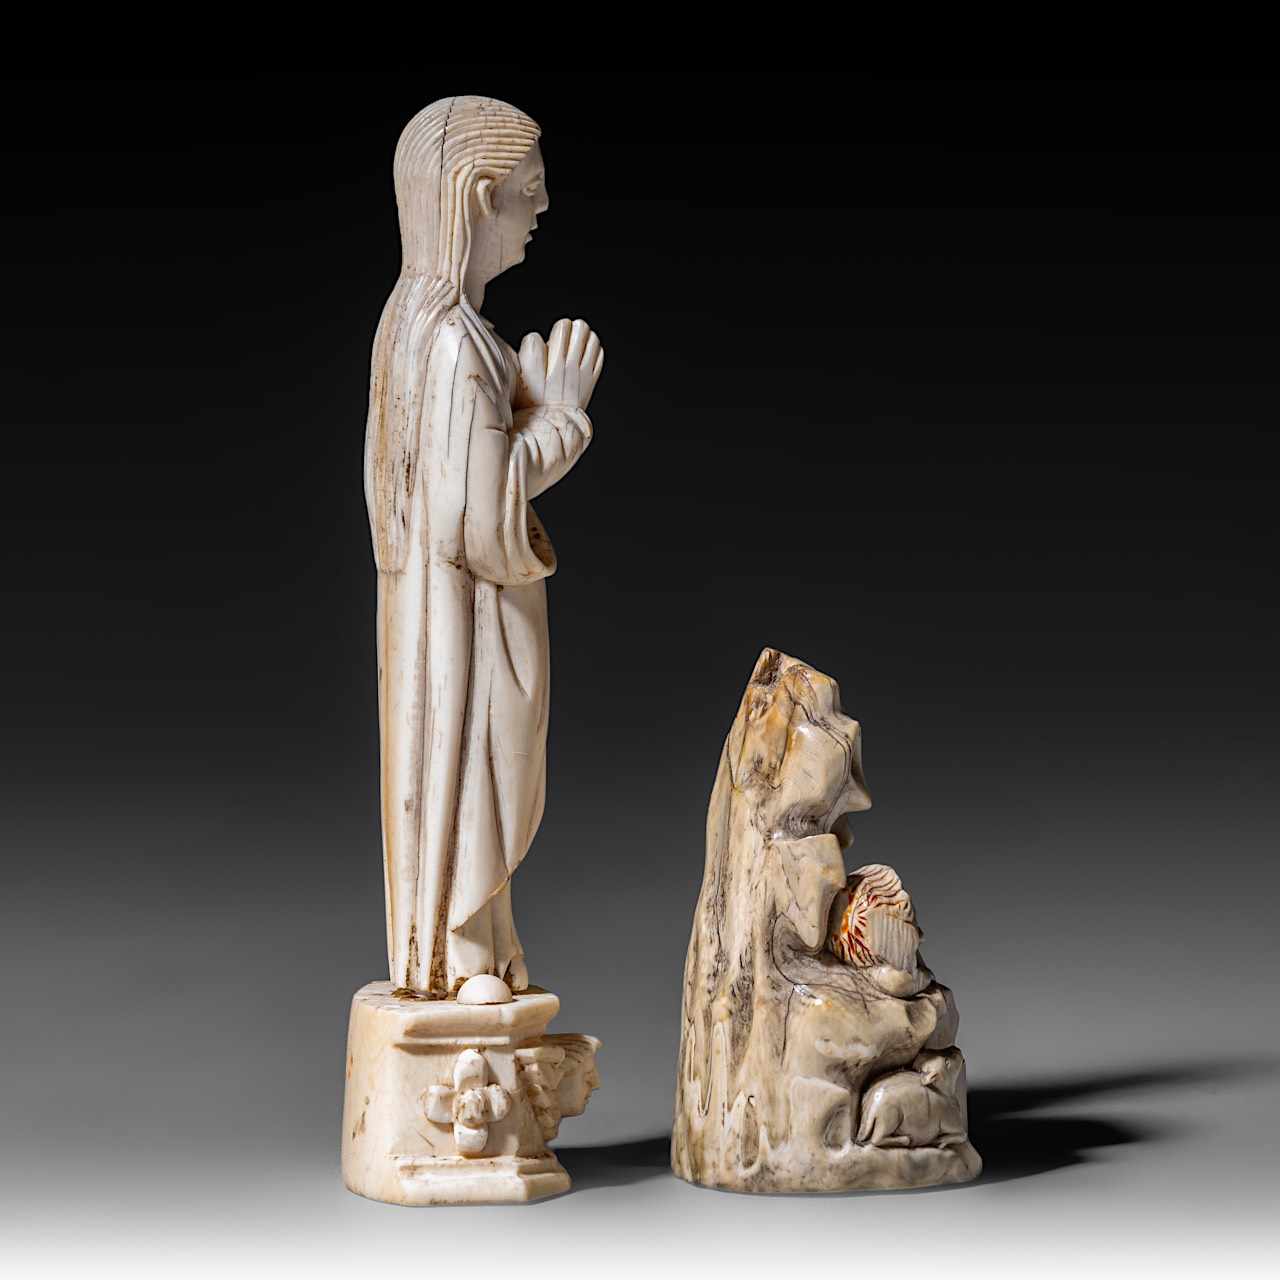 Two carved ivory Indo-Portuguese religious figures; one depicts an upright standing and praying Virg - Image 5 of 8